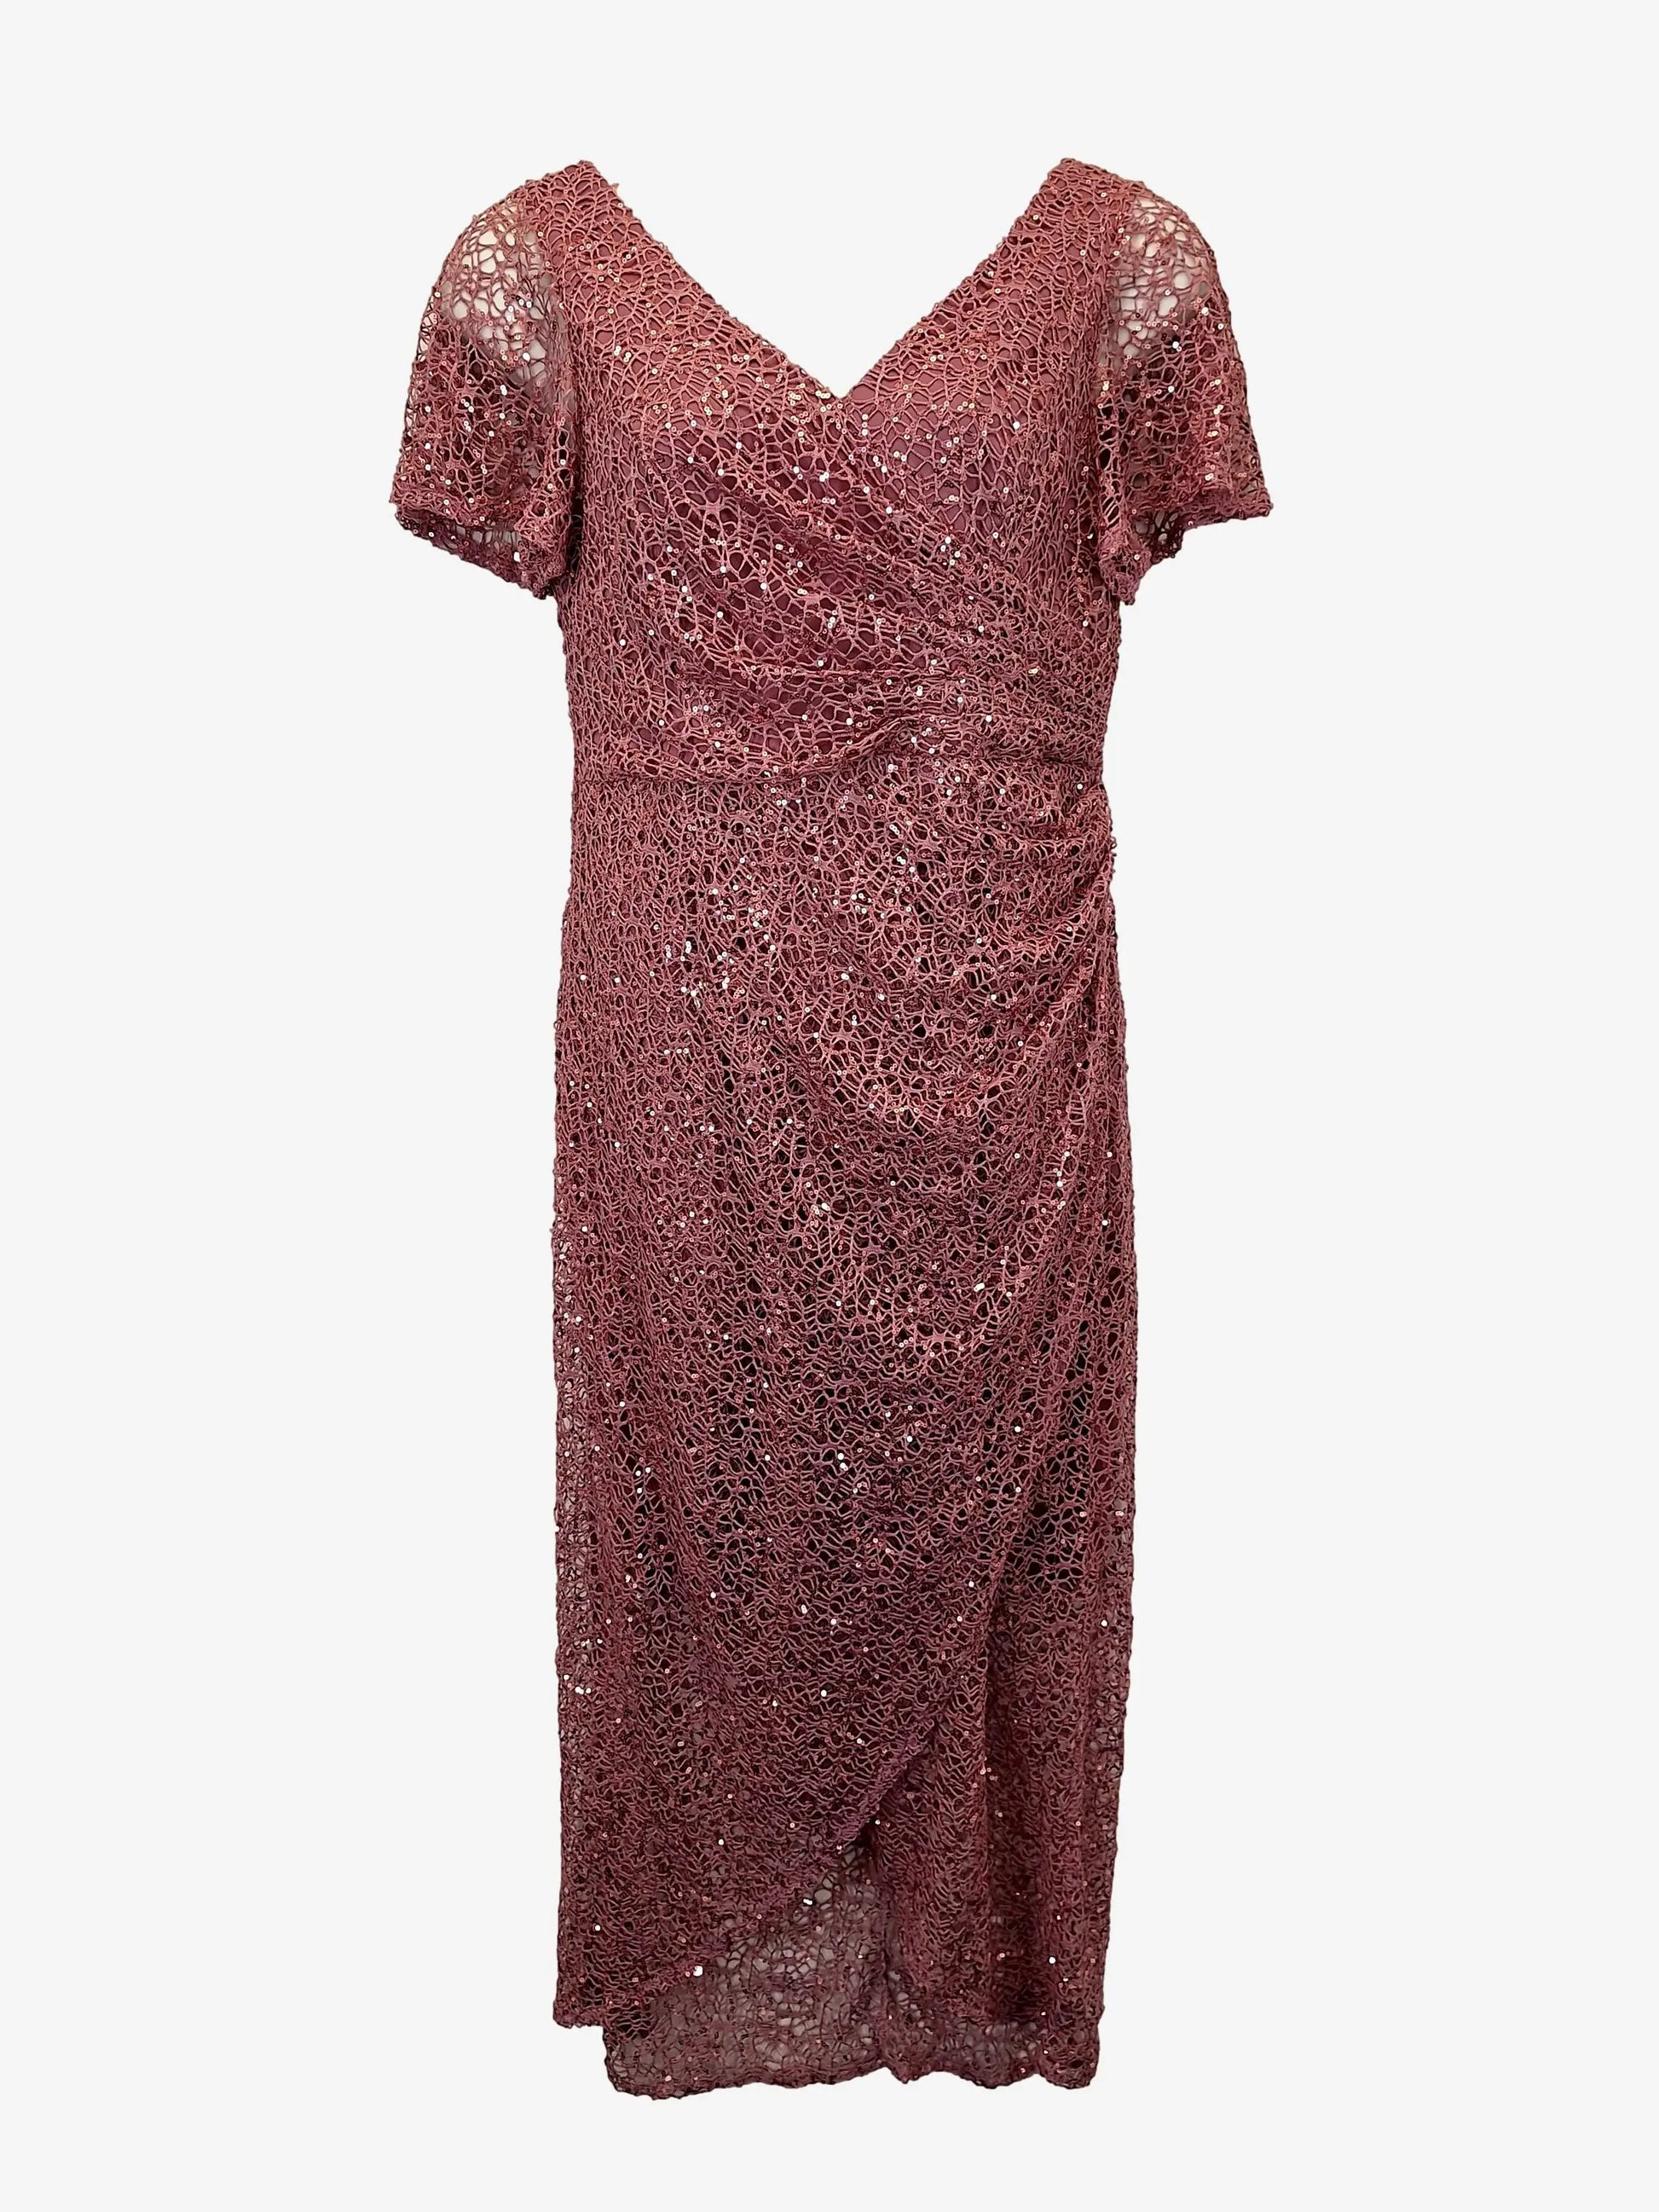 Second Take Sequin Maxi Dress - Rose Gold